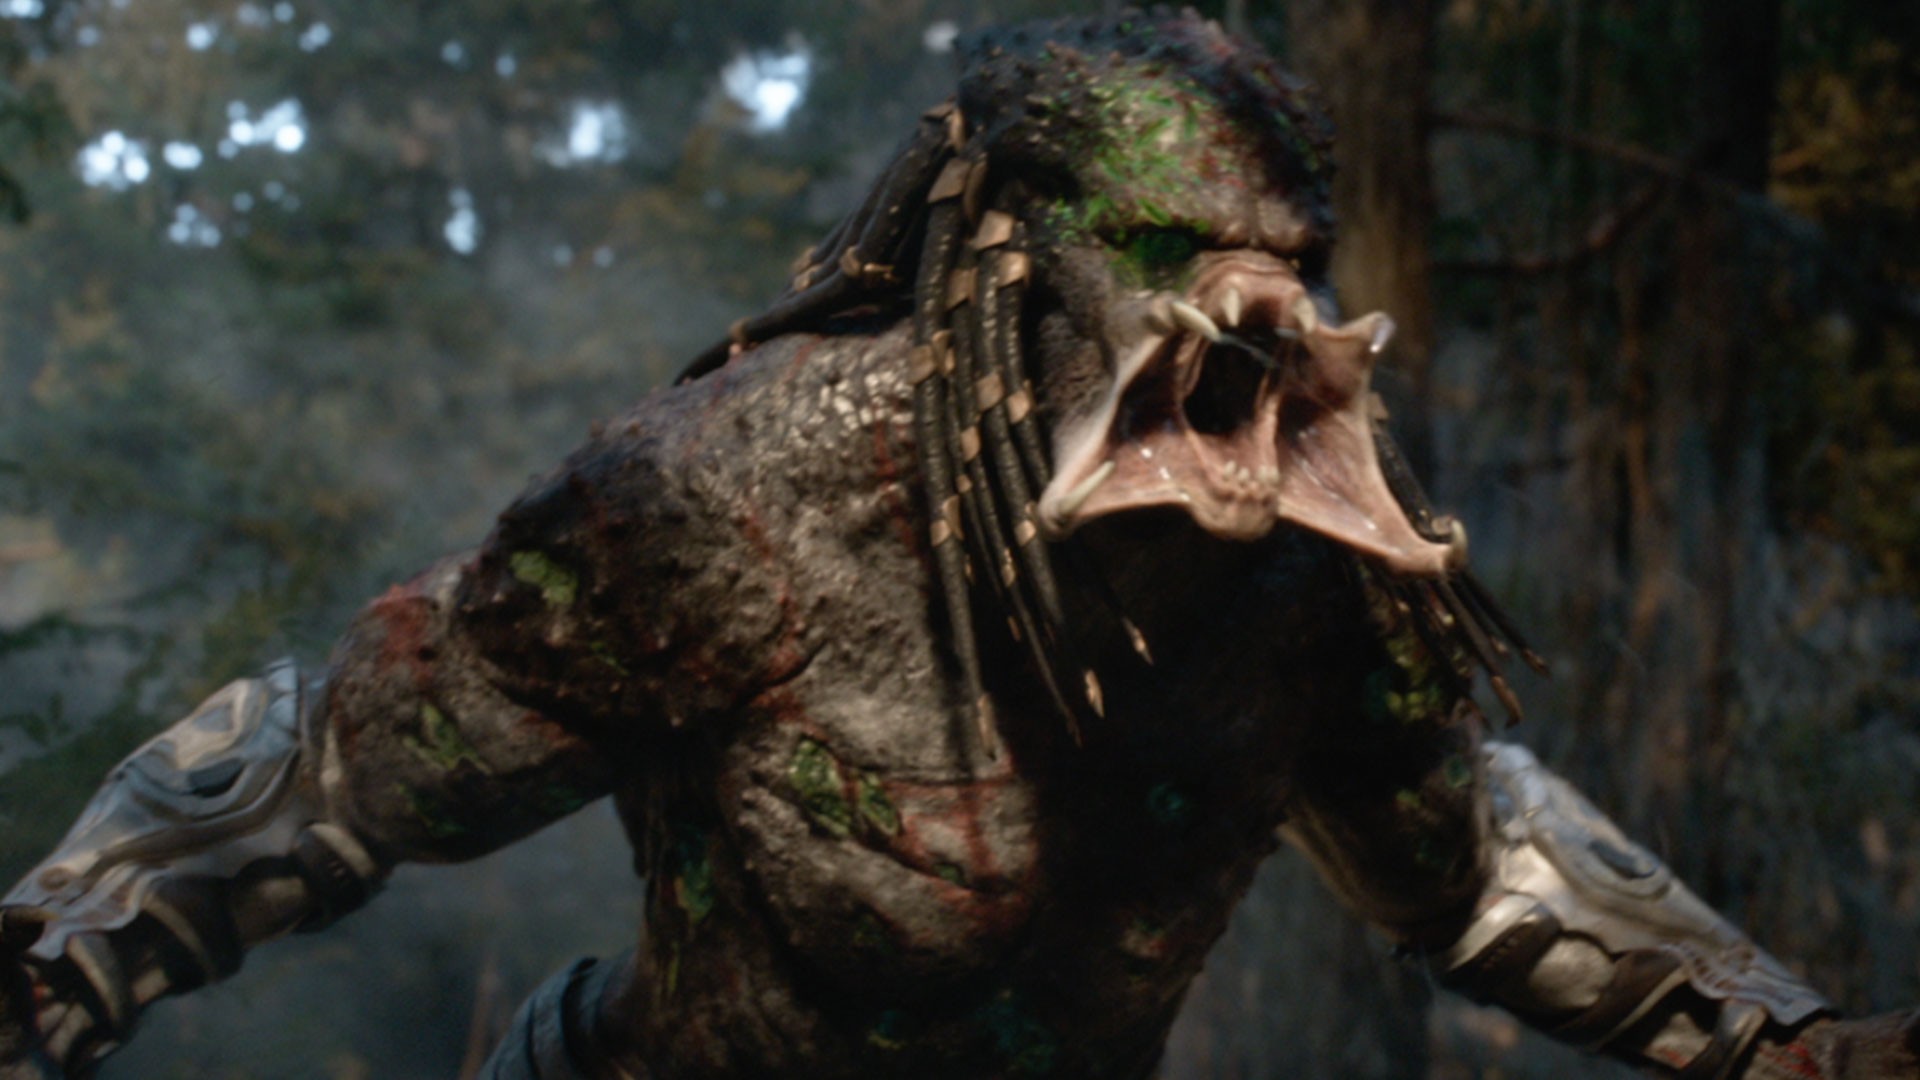 Rotten Tomatoes - The Predator is currently Rotten at 34% with 153